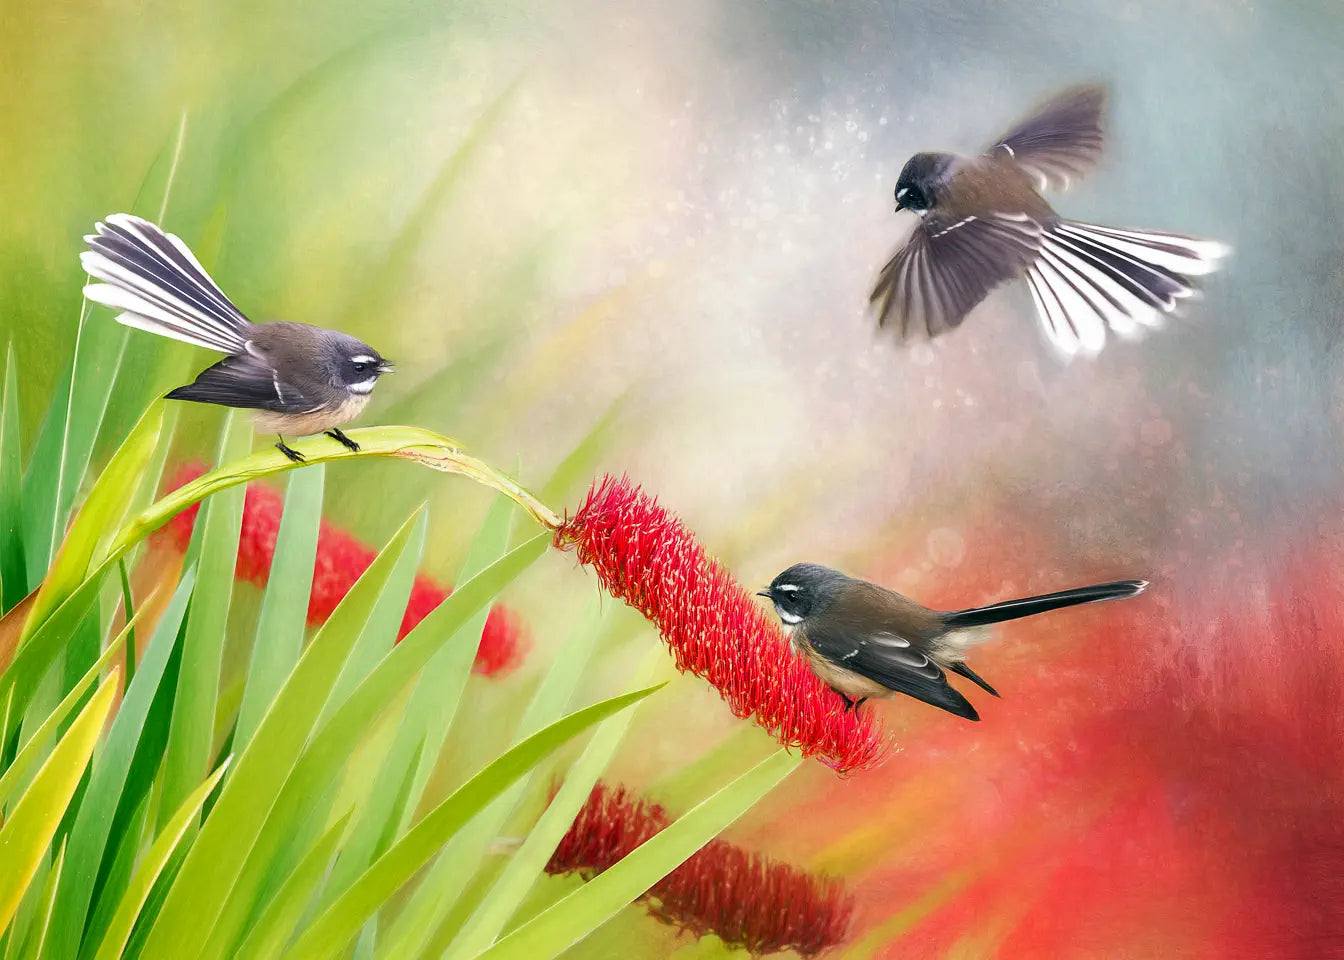 Artwork of three fantails fluttering around a Poor Knights lily flower